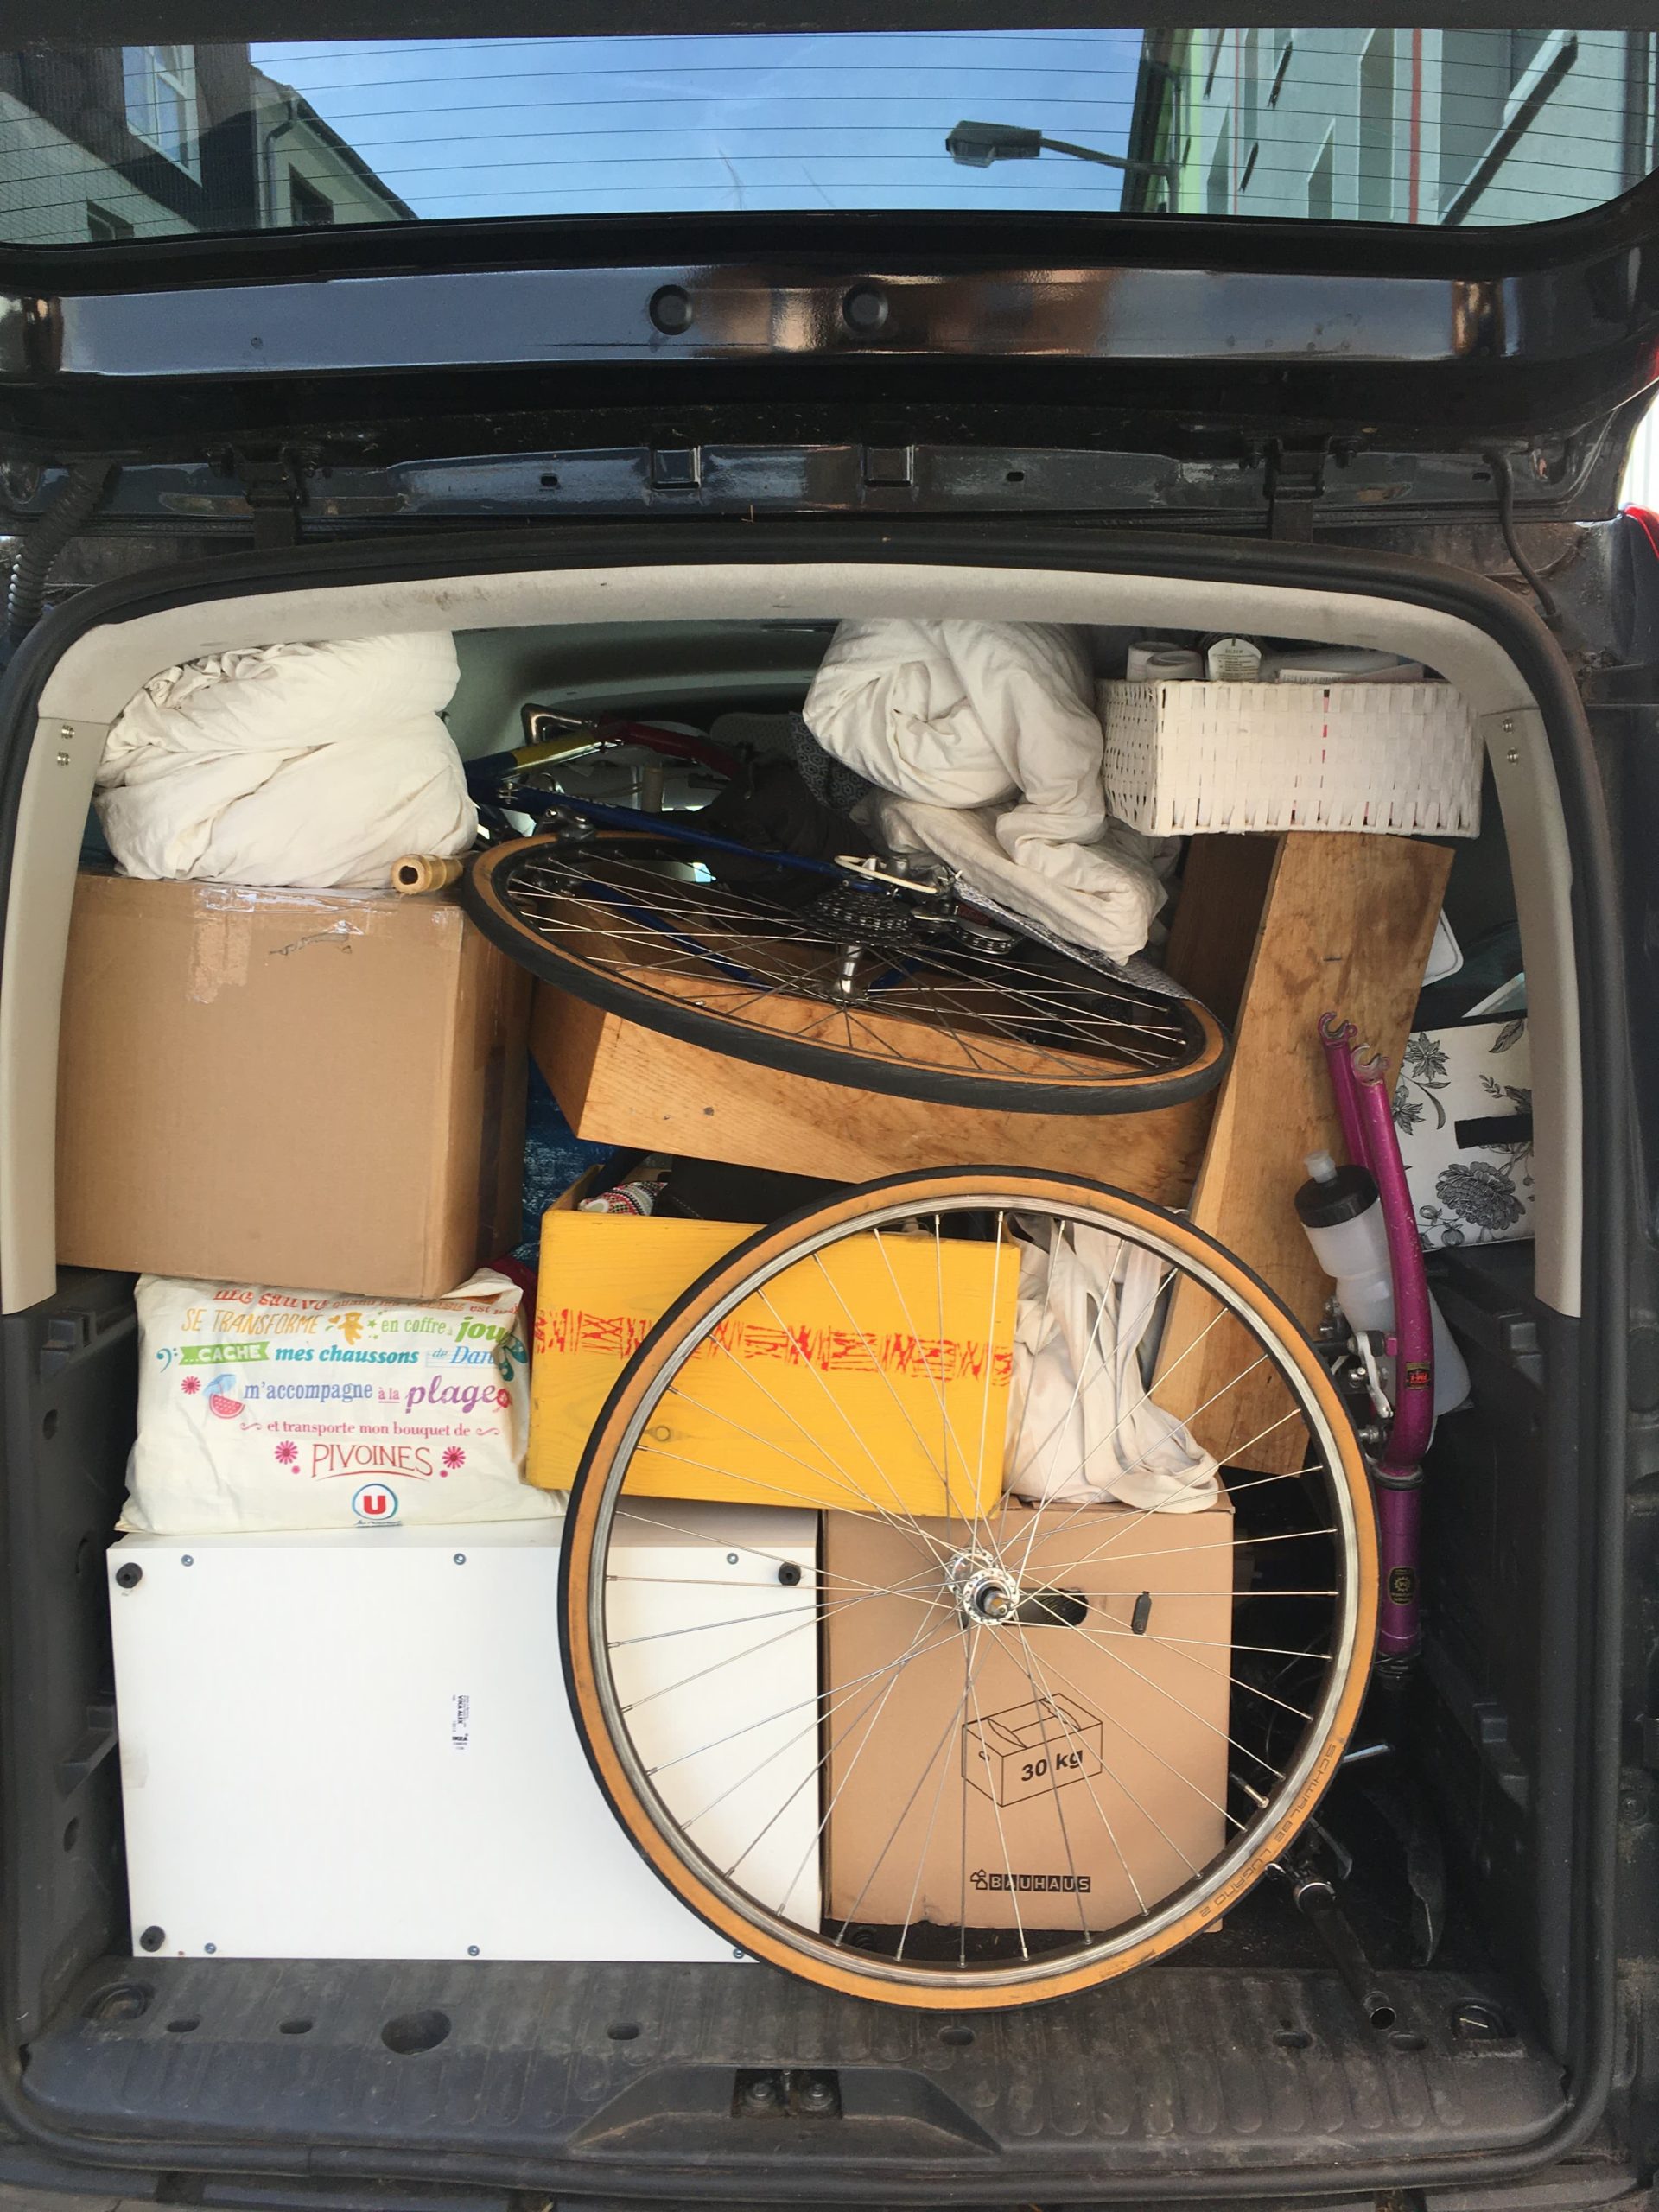 van full of boxes ready to move